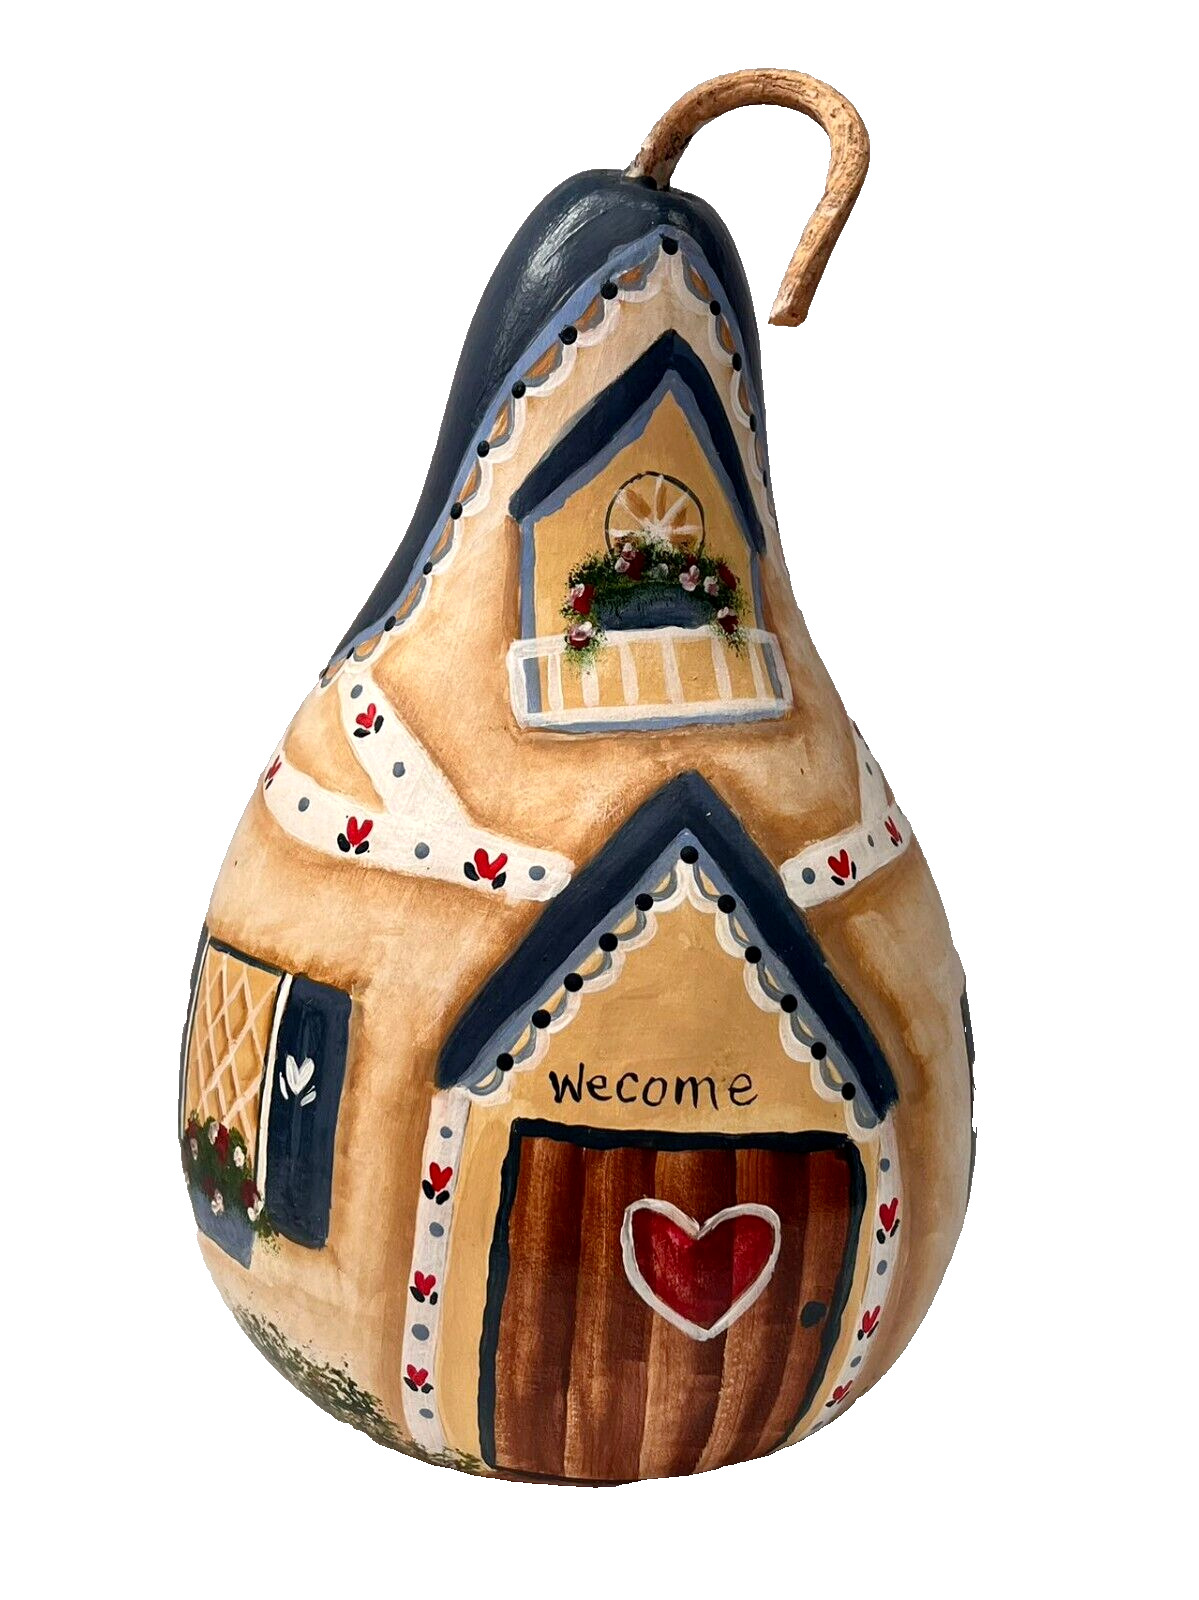 Vintage Hand Painted Cottage Heart Gourd Rustic Country Folk Art Farmhouse Decor